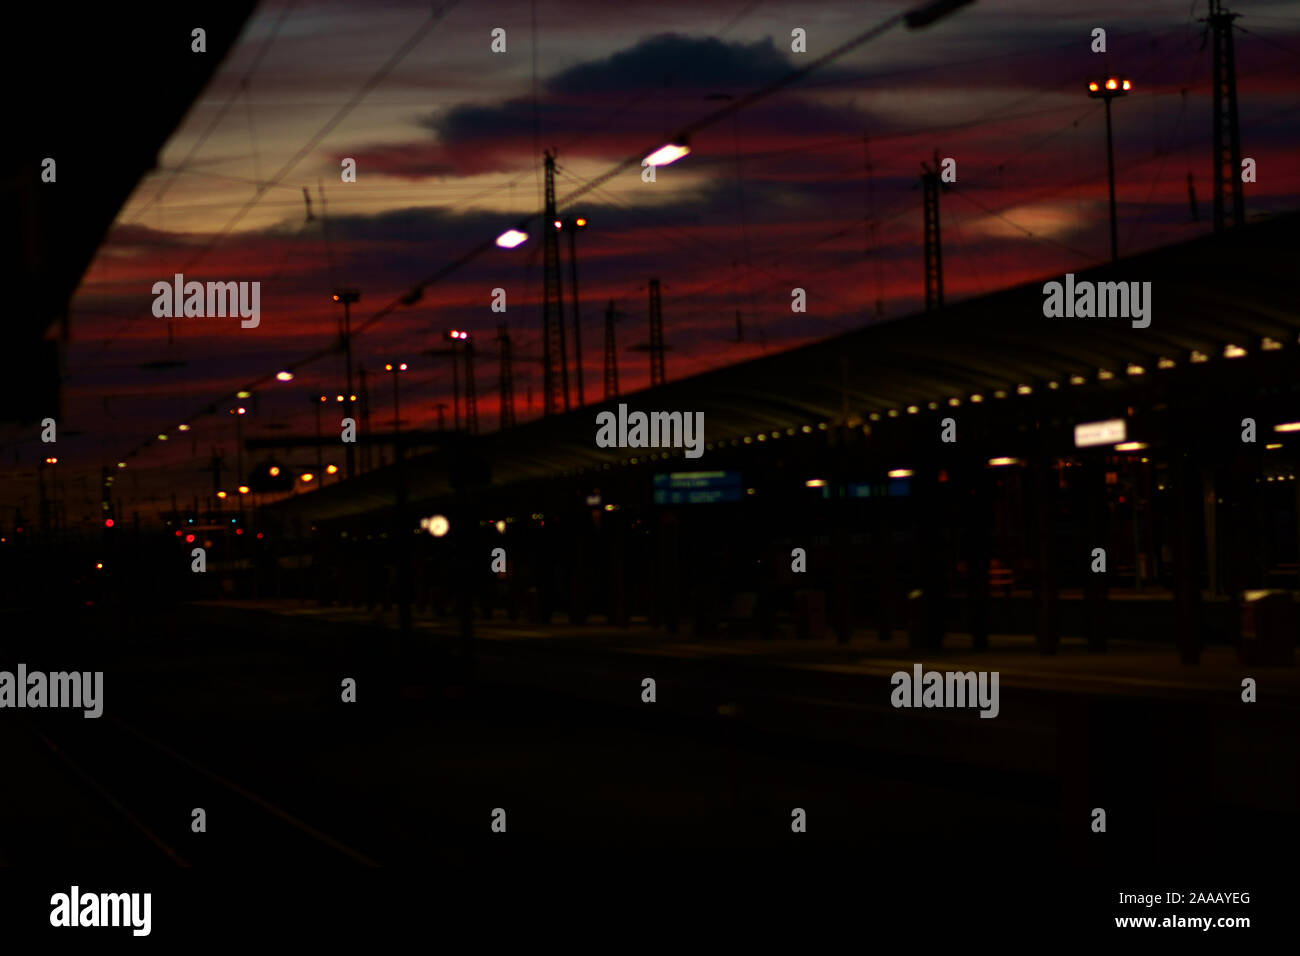 The night lights of a railway station during the sunset. Stock Photo